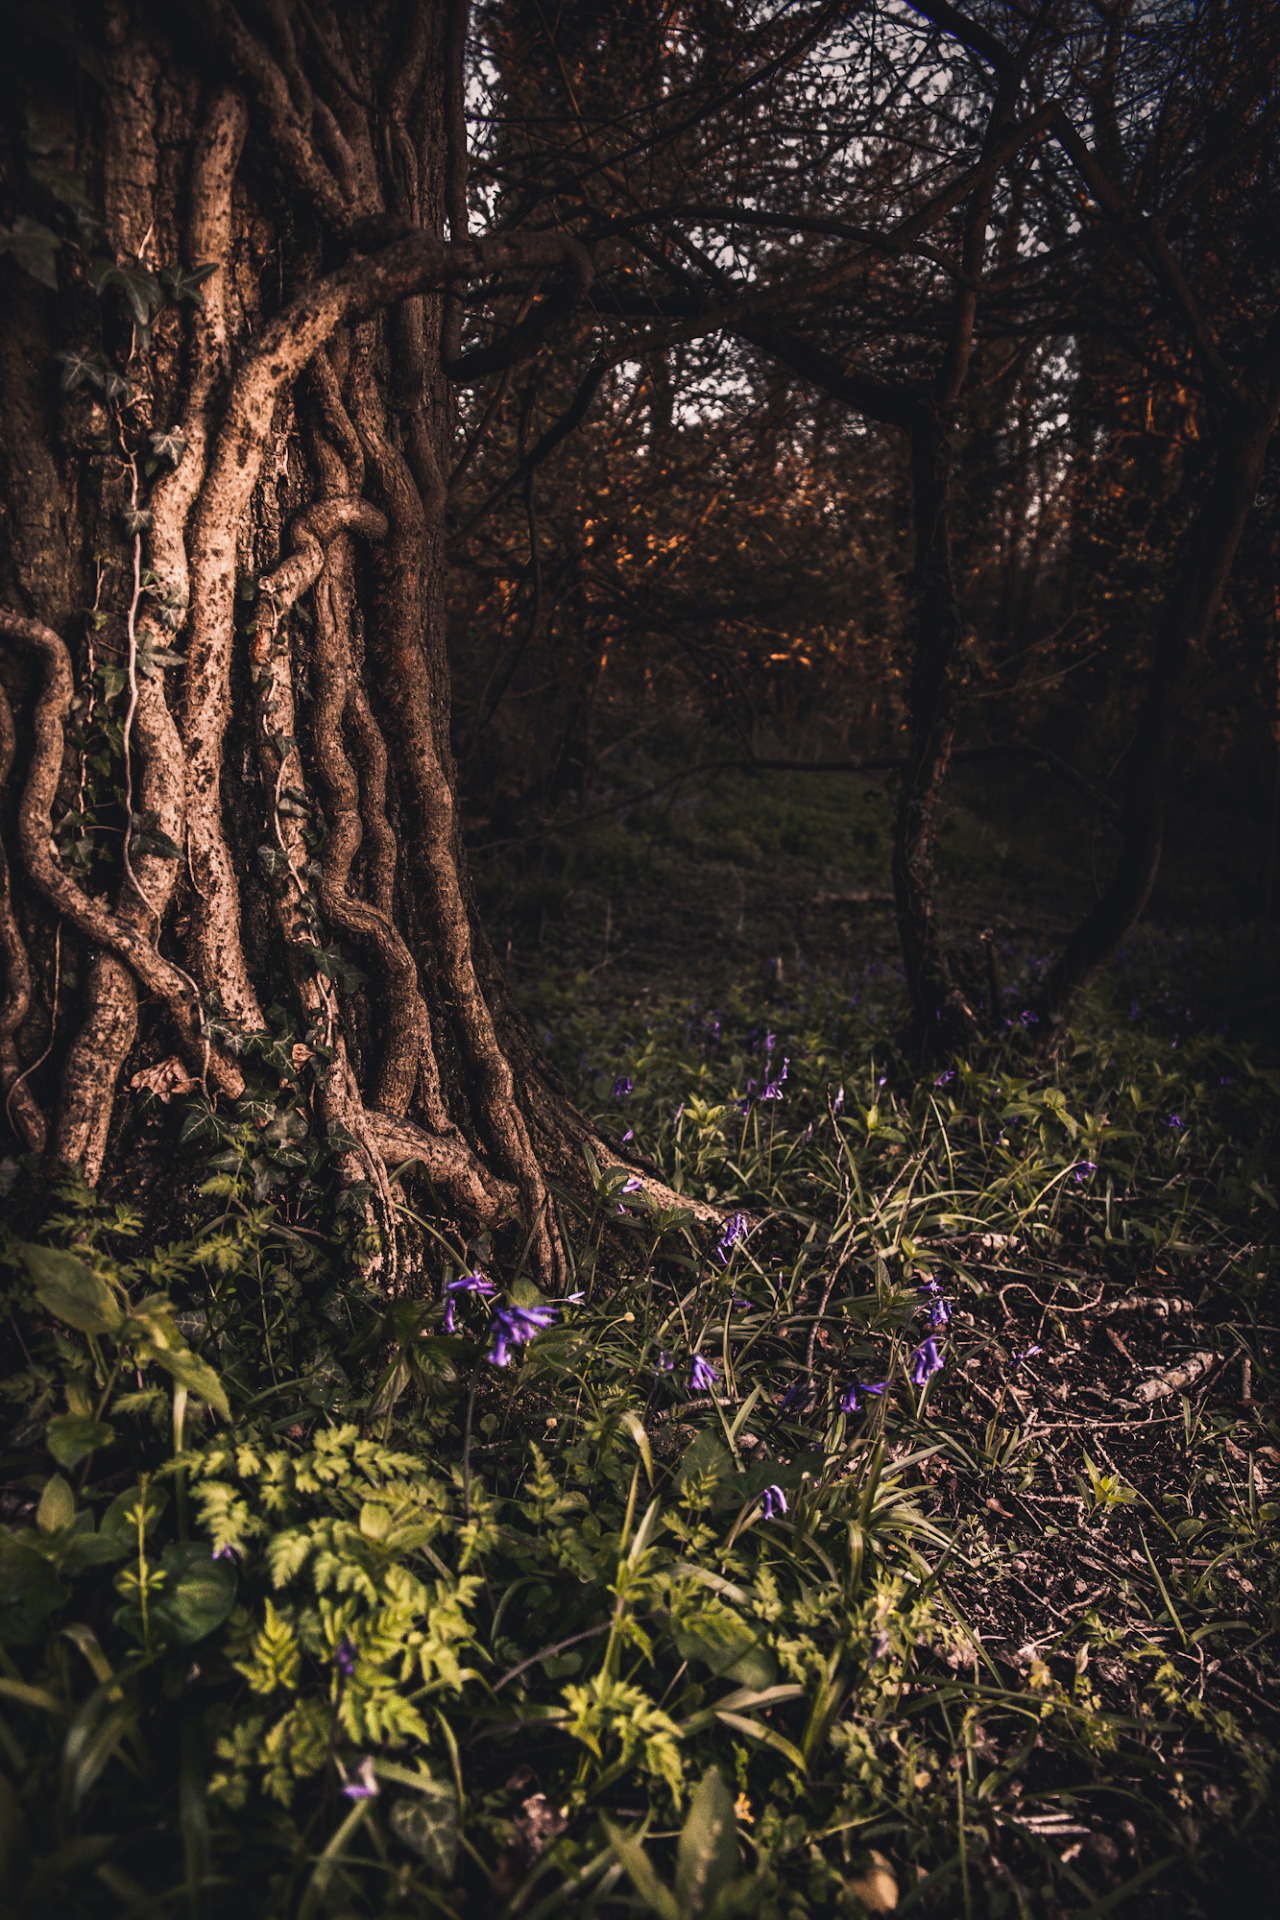 freddie-photography:  I stumbled across this woodland by accident a few hours ago,